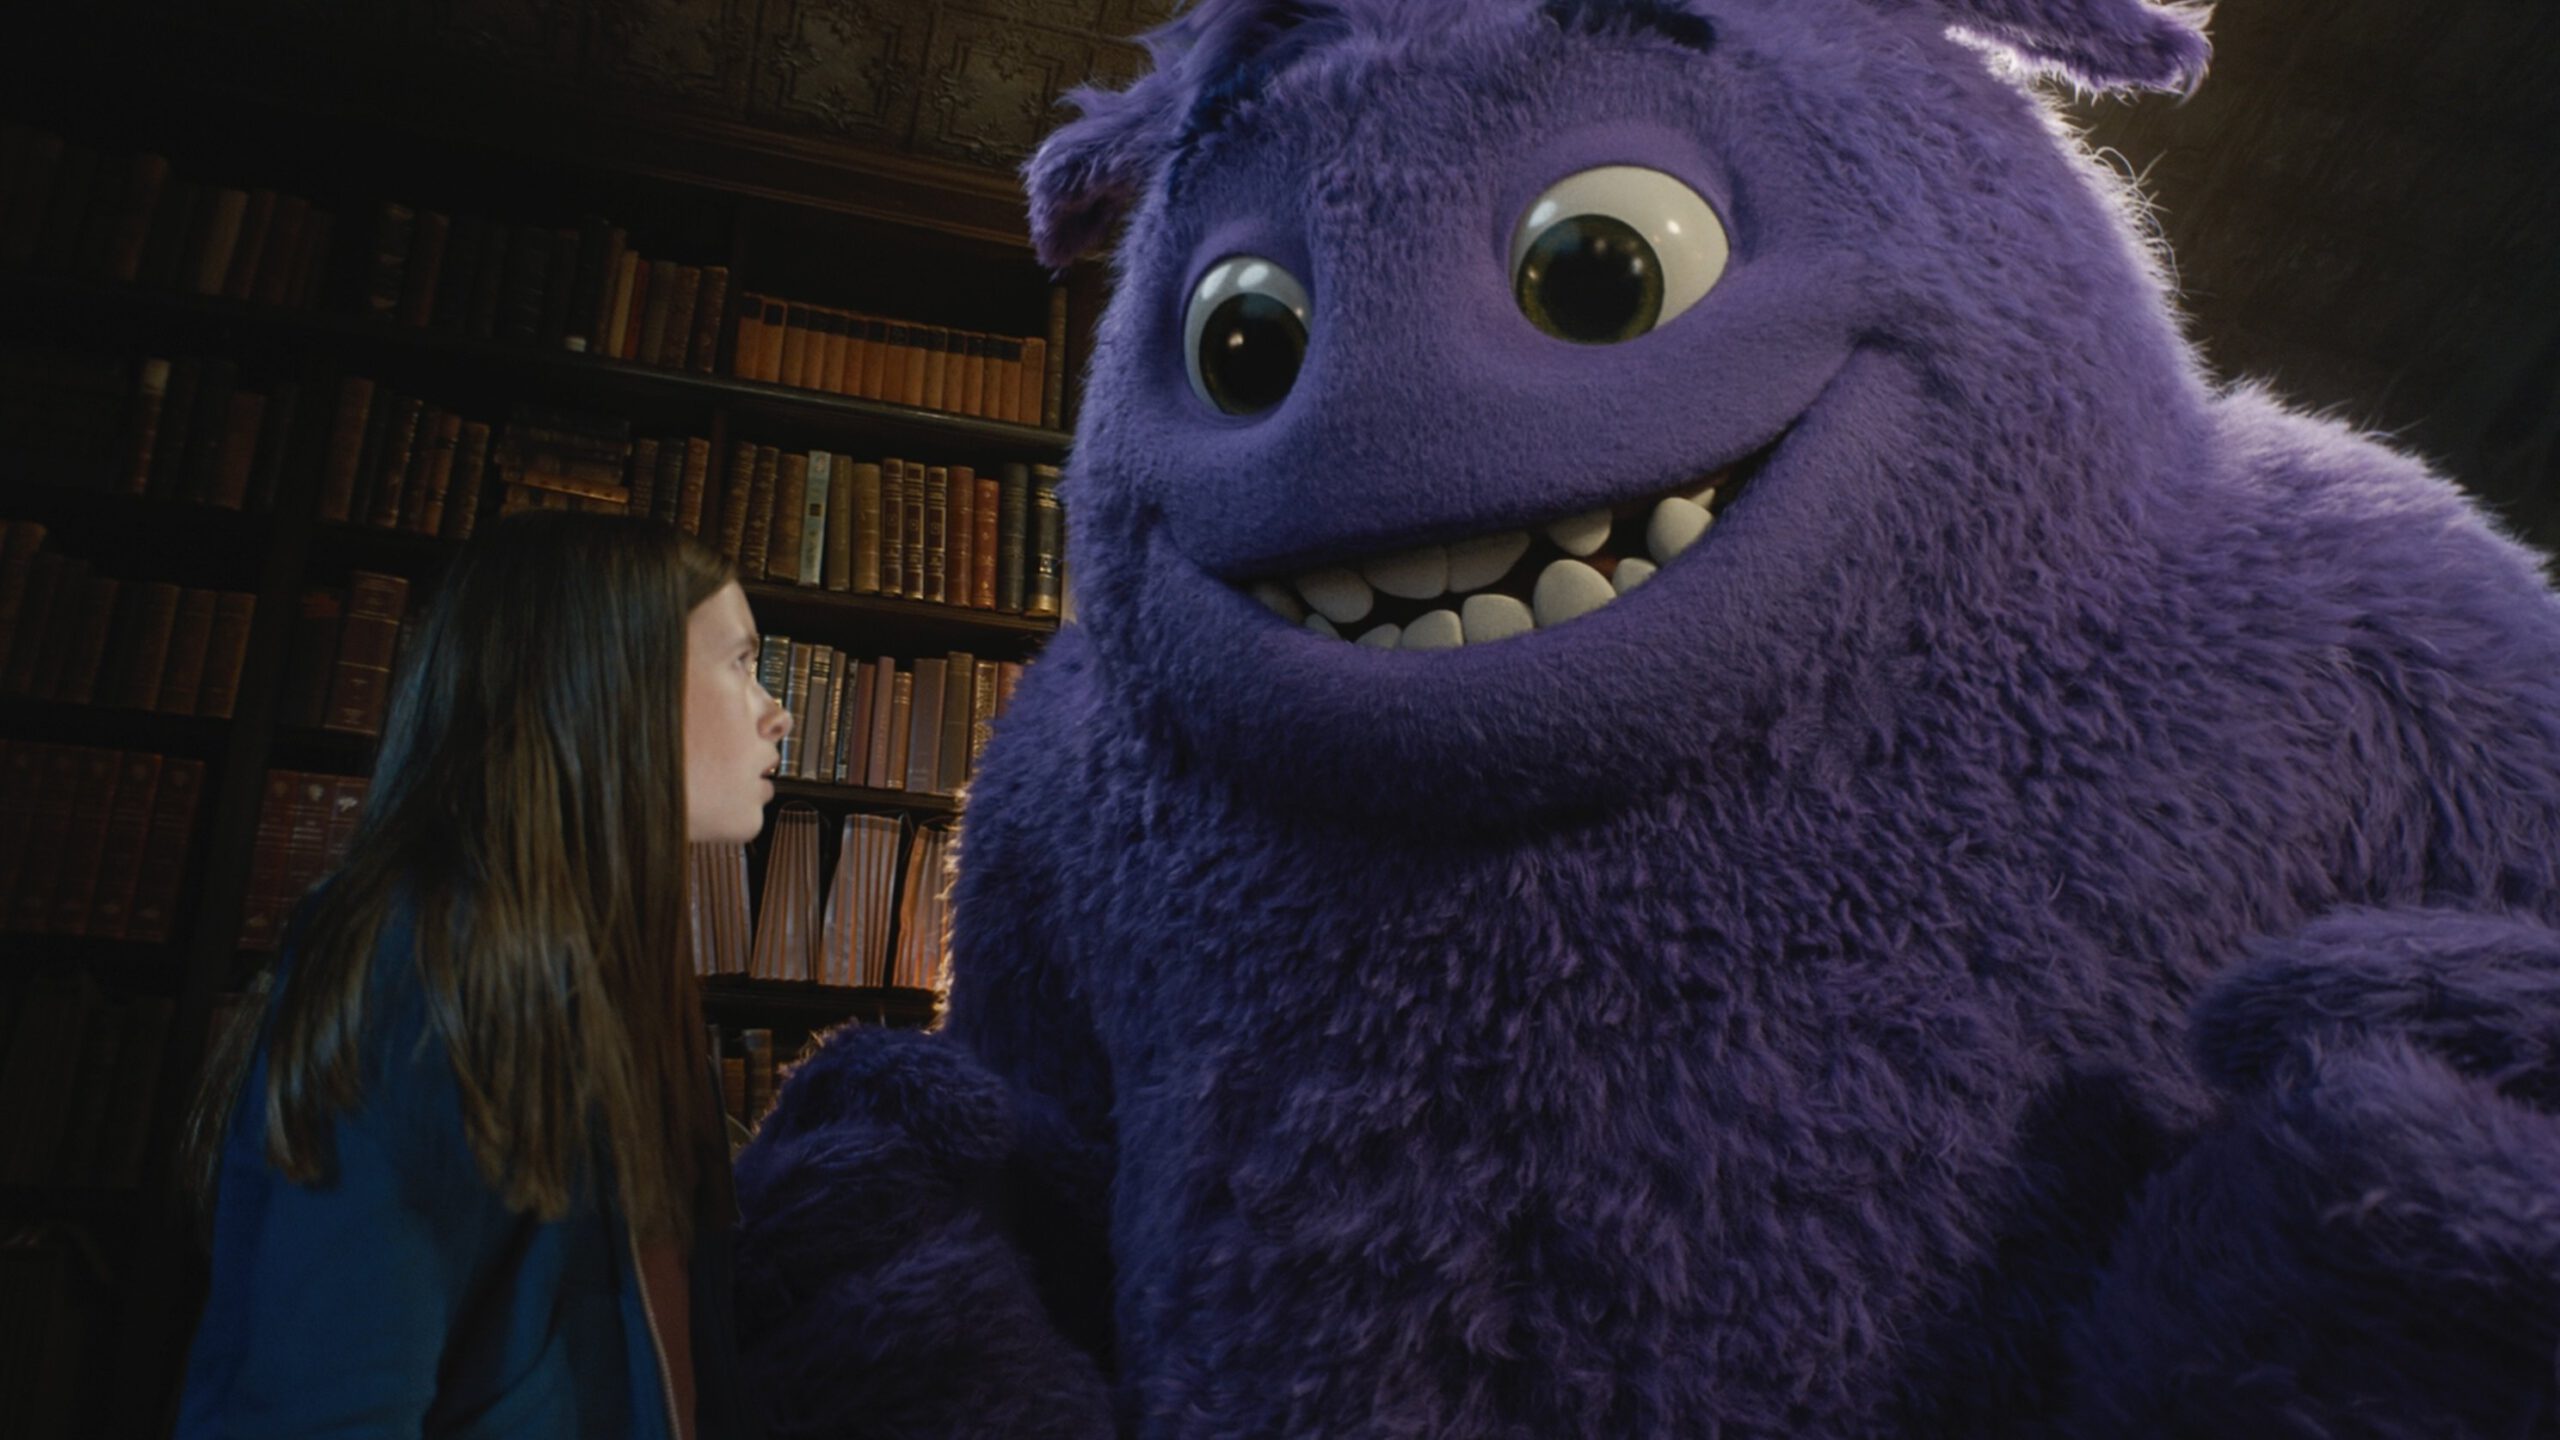 A large, fluffy, purple creature smiles at a young girl.